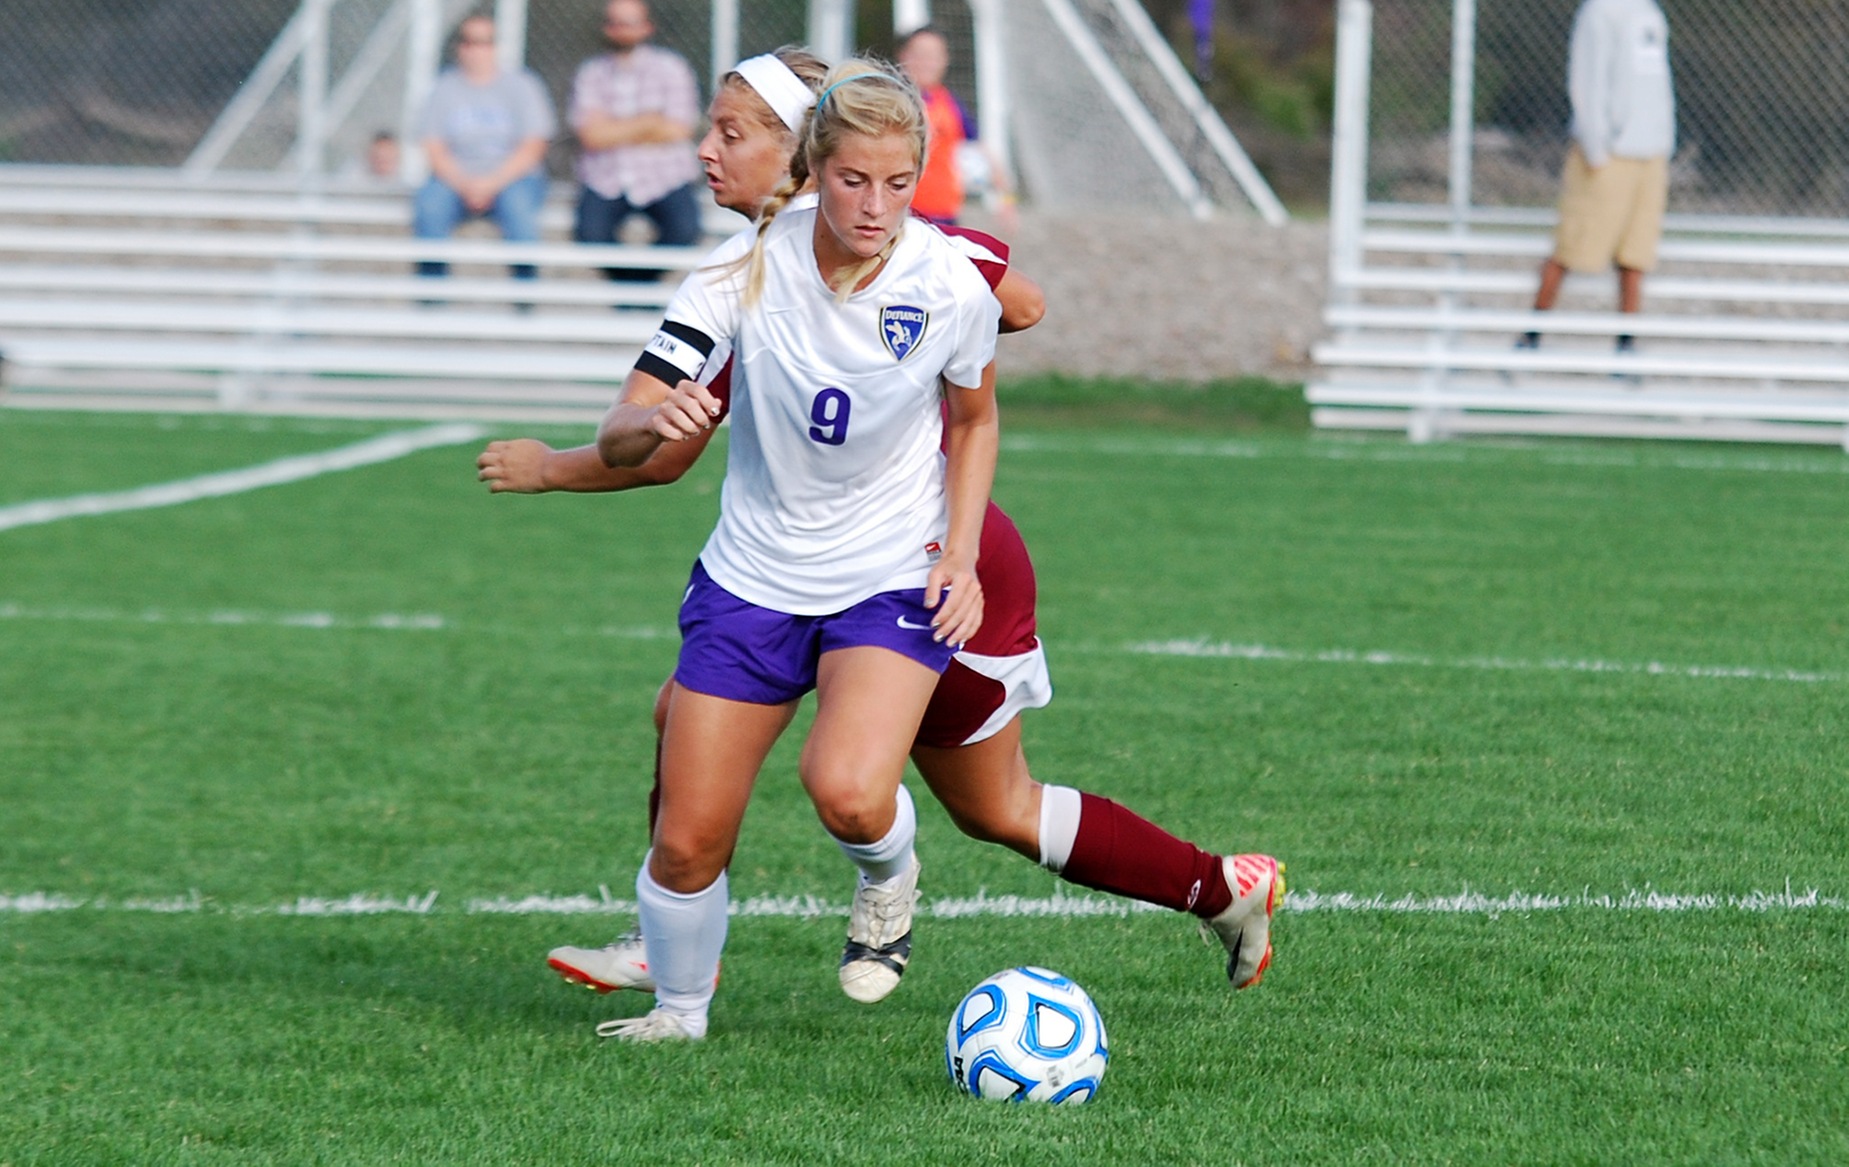 Heitkamp Selected to Division III Academic All-Ohio Team